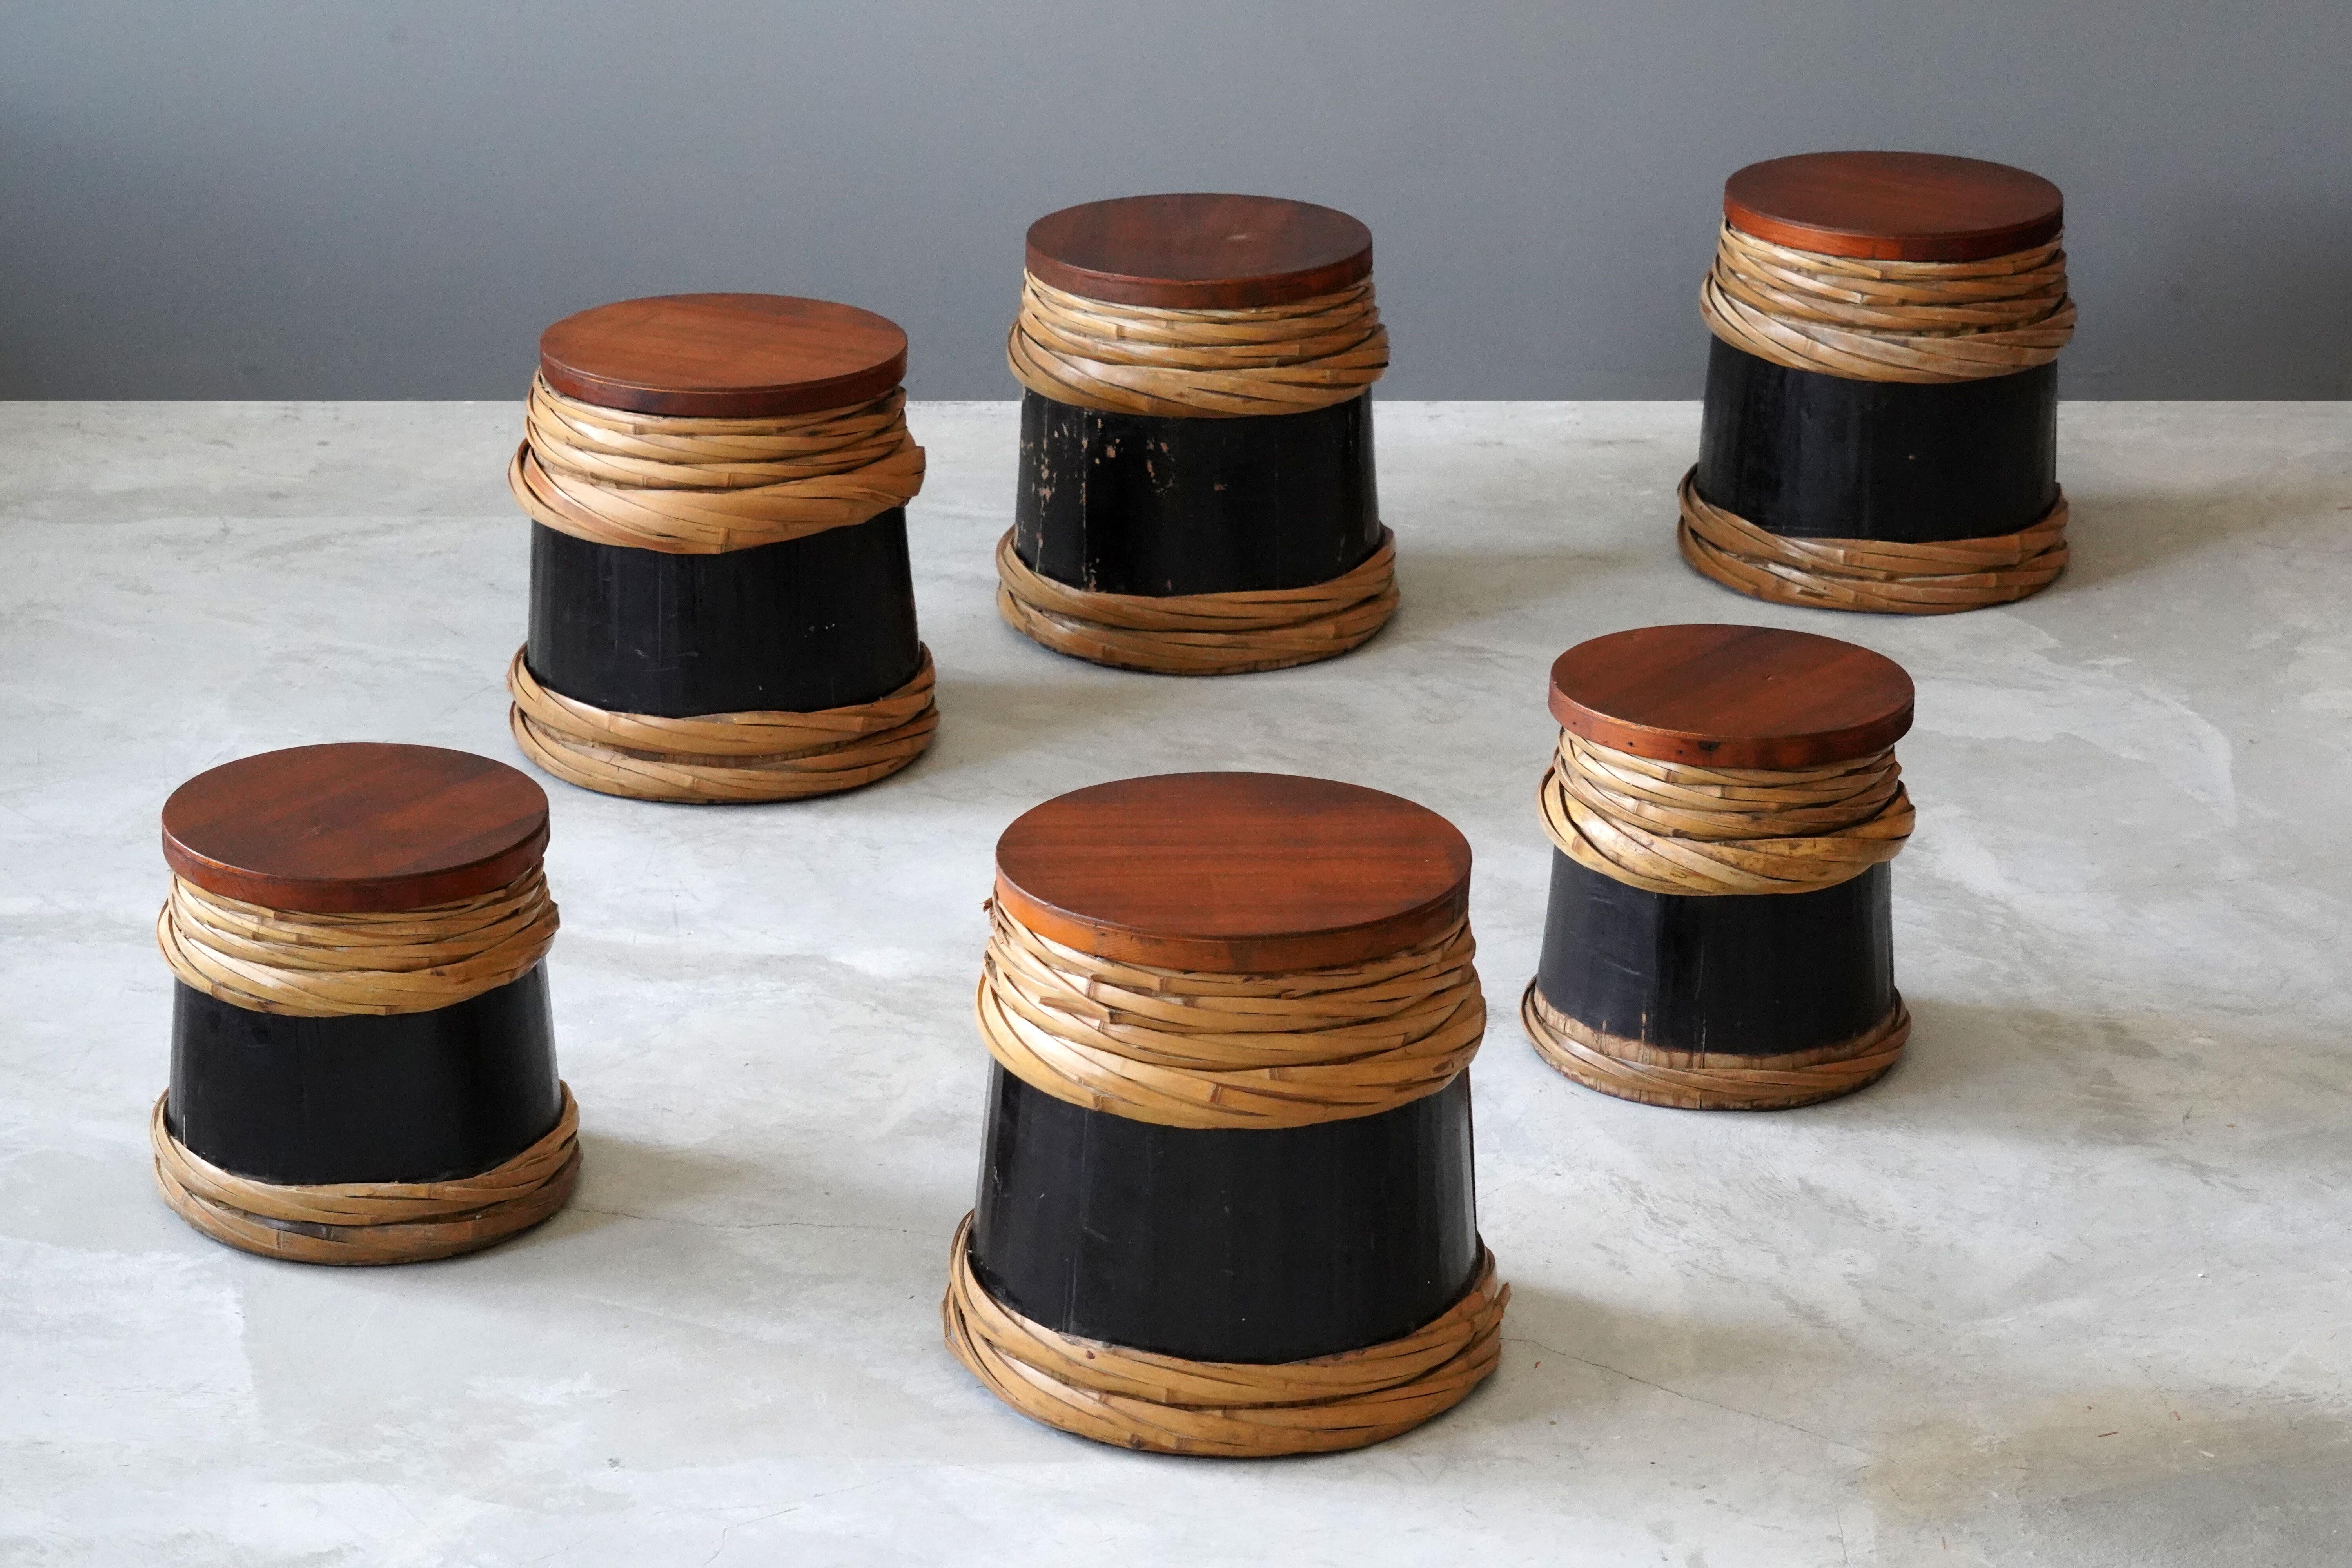 A set of 6 stools designed by an American architect, and executed in America, 1950s.

In painted wood, bamboo and teak. 

The large stools are 14